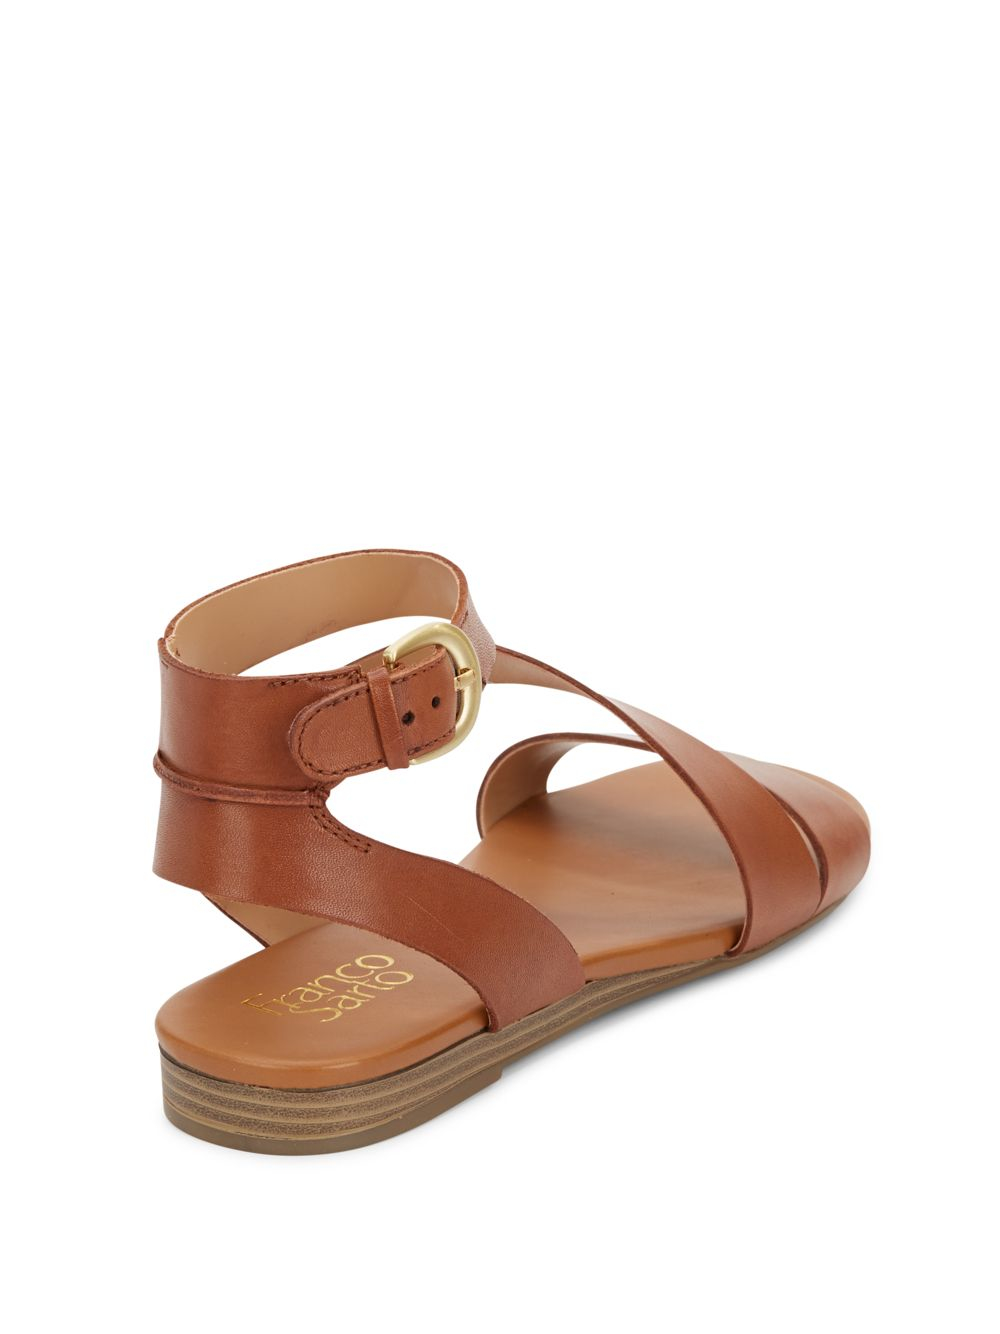 Franco Sarto Gustar Leather Sandals in Natural - Lyst